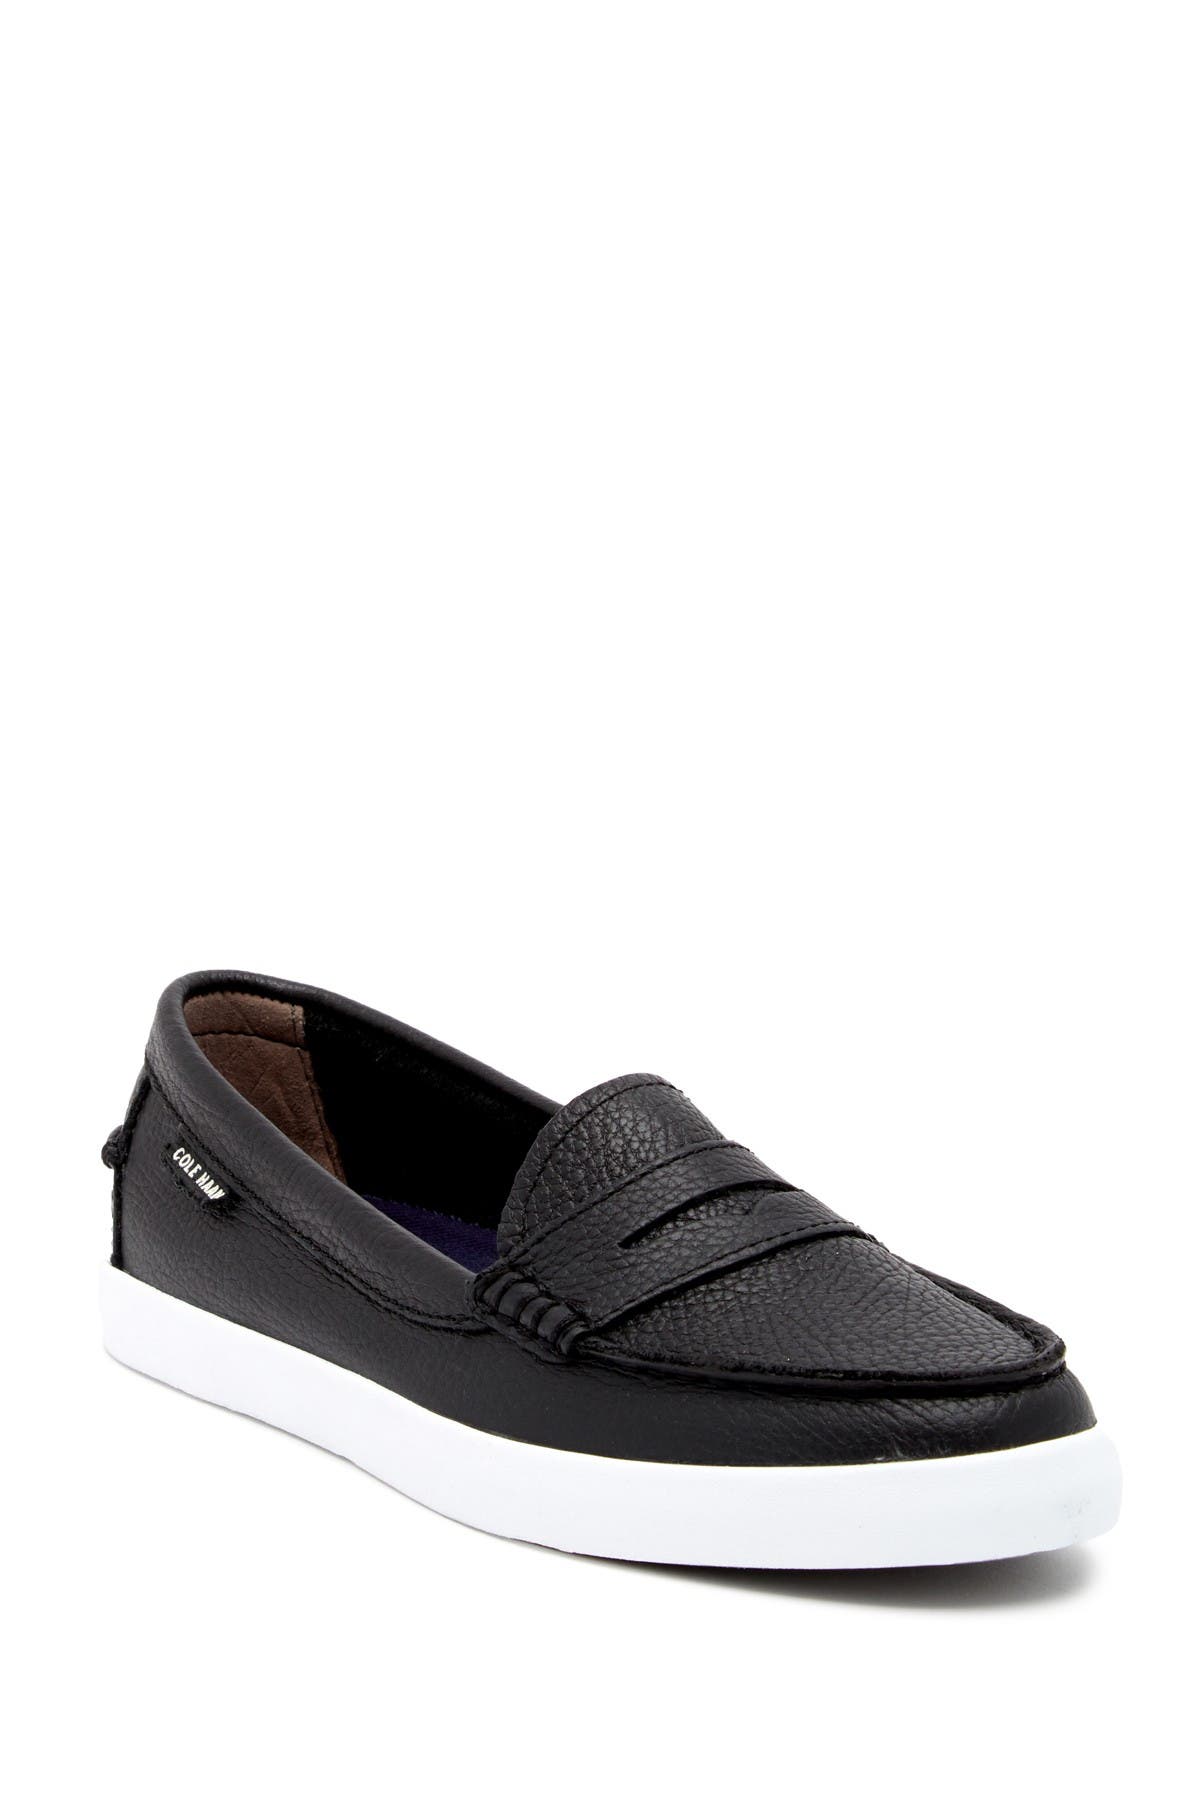 nordstrom cole haan shoes